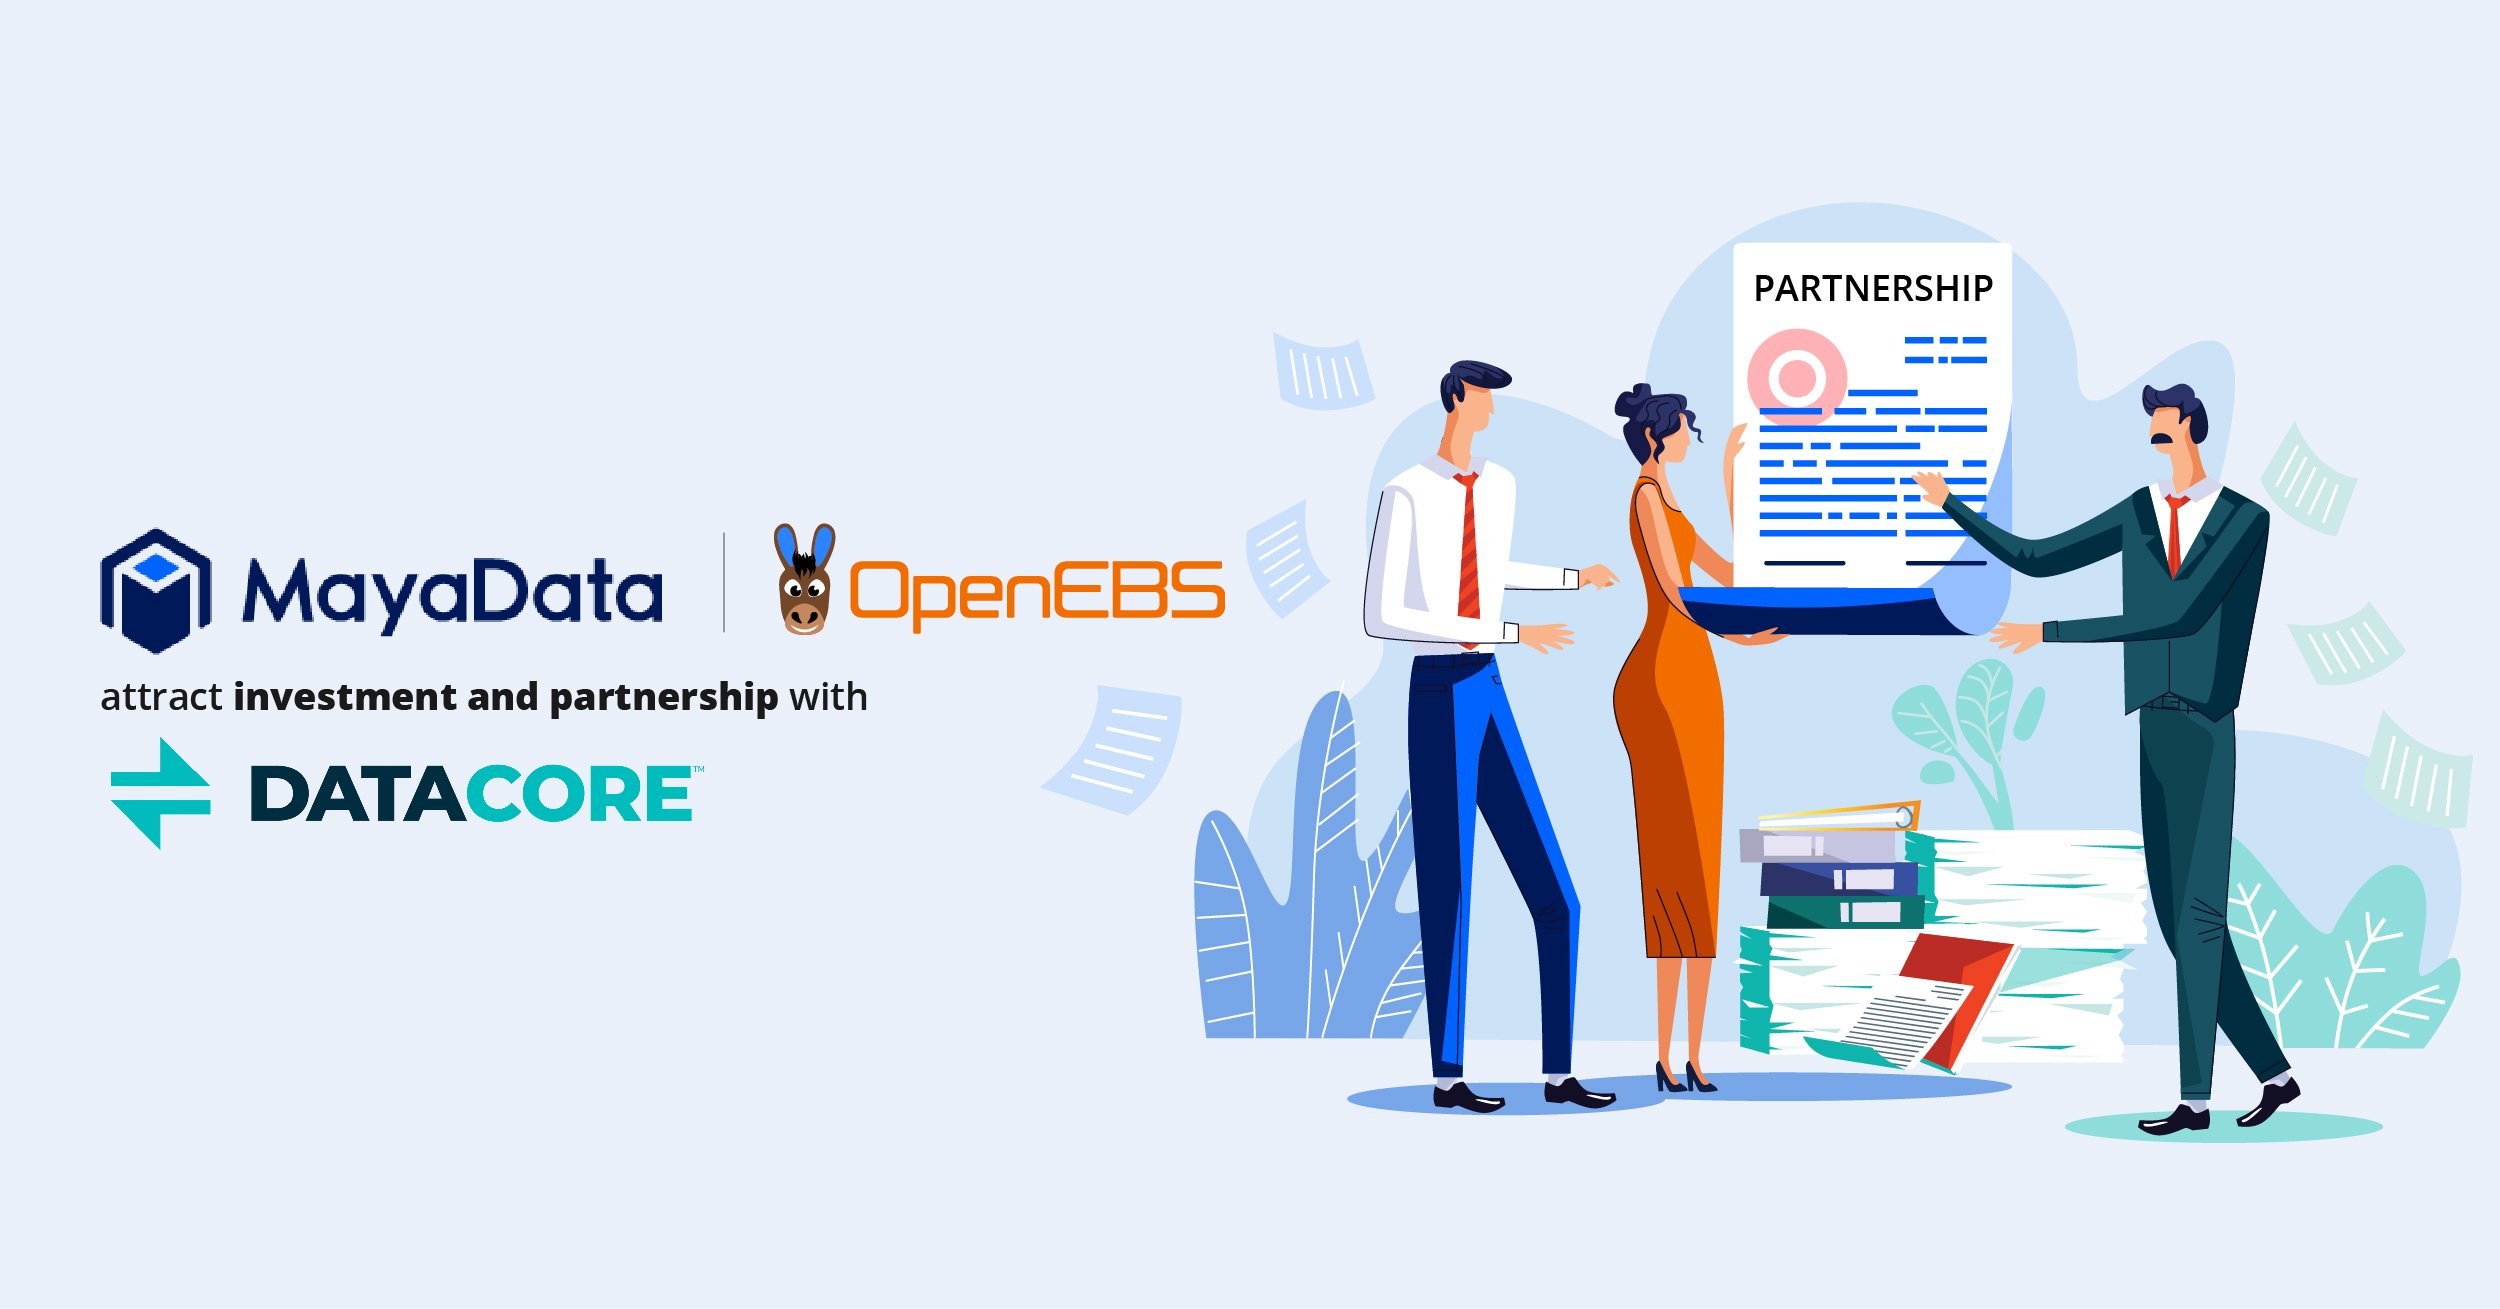 MayaData and OpenEBS attract investment and partnership with Datacore